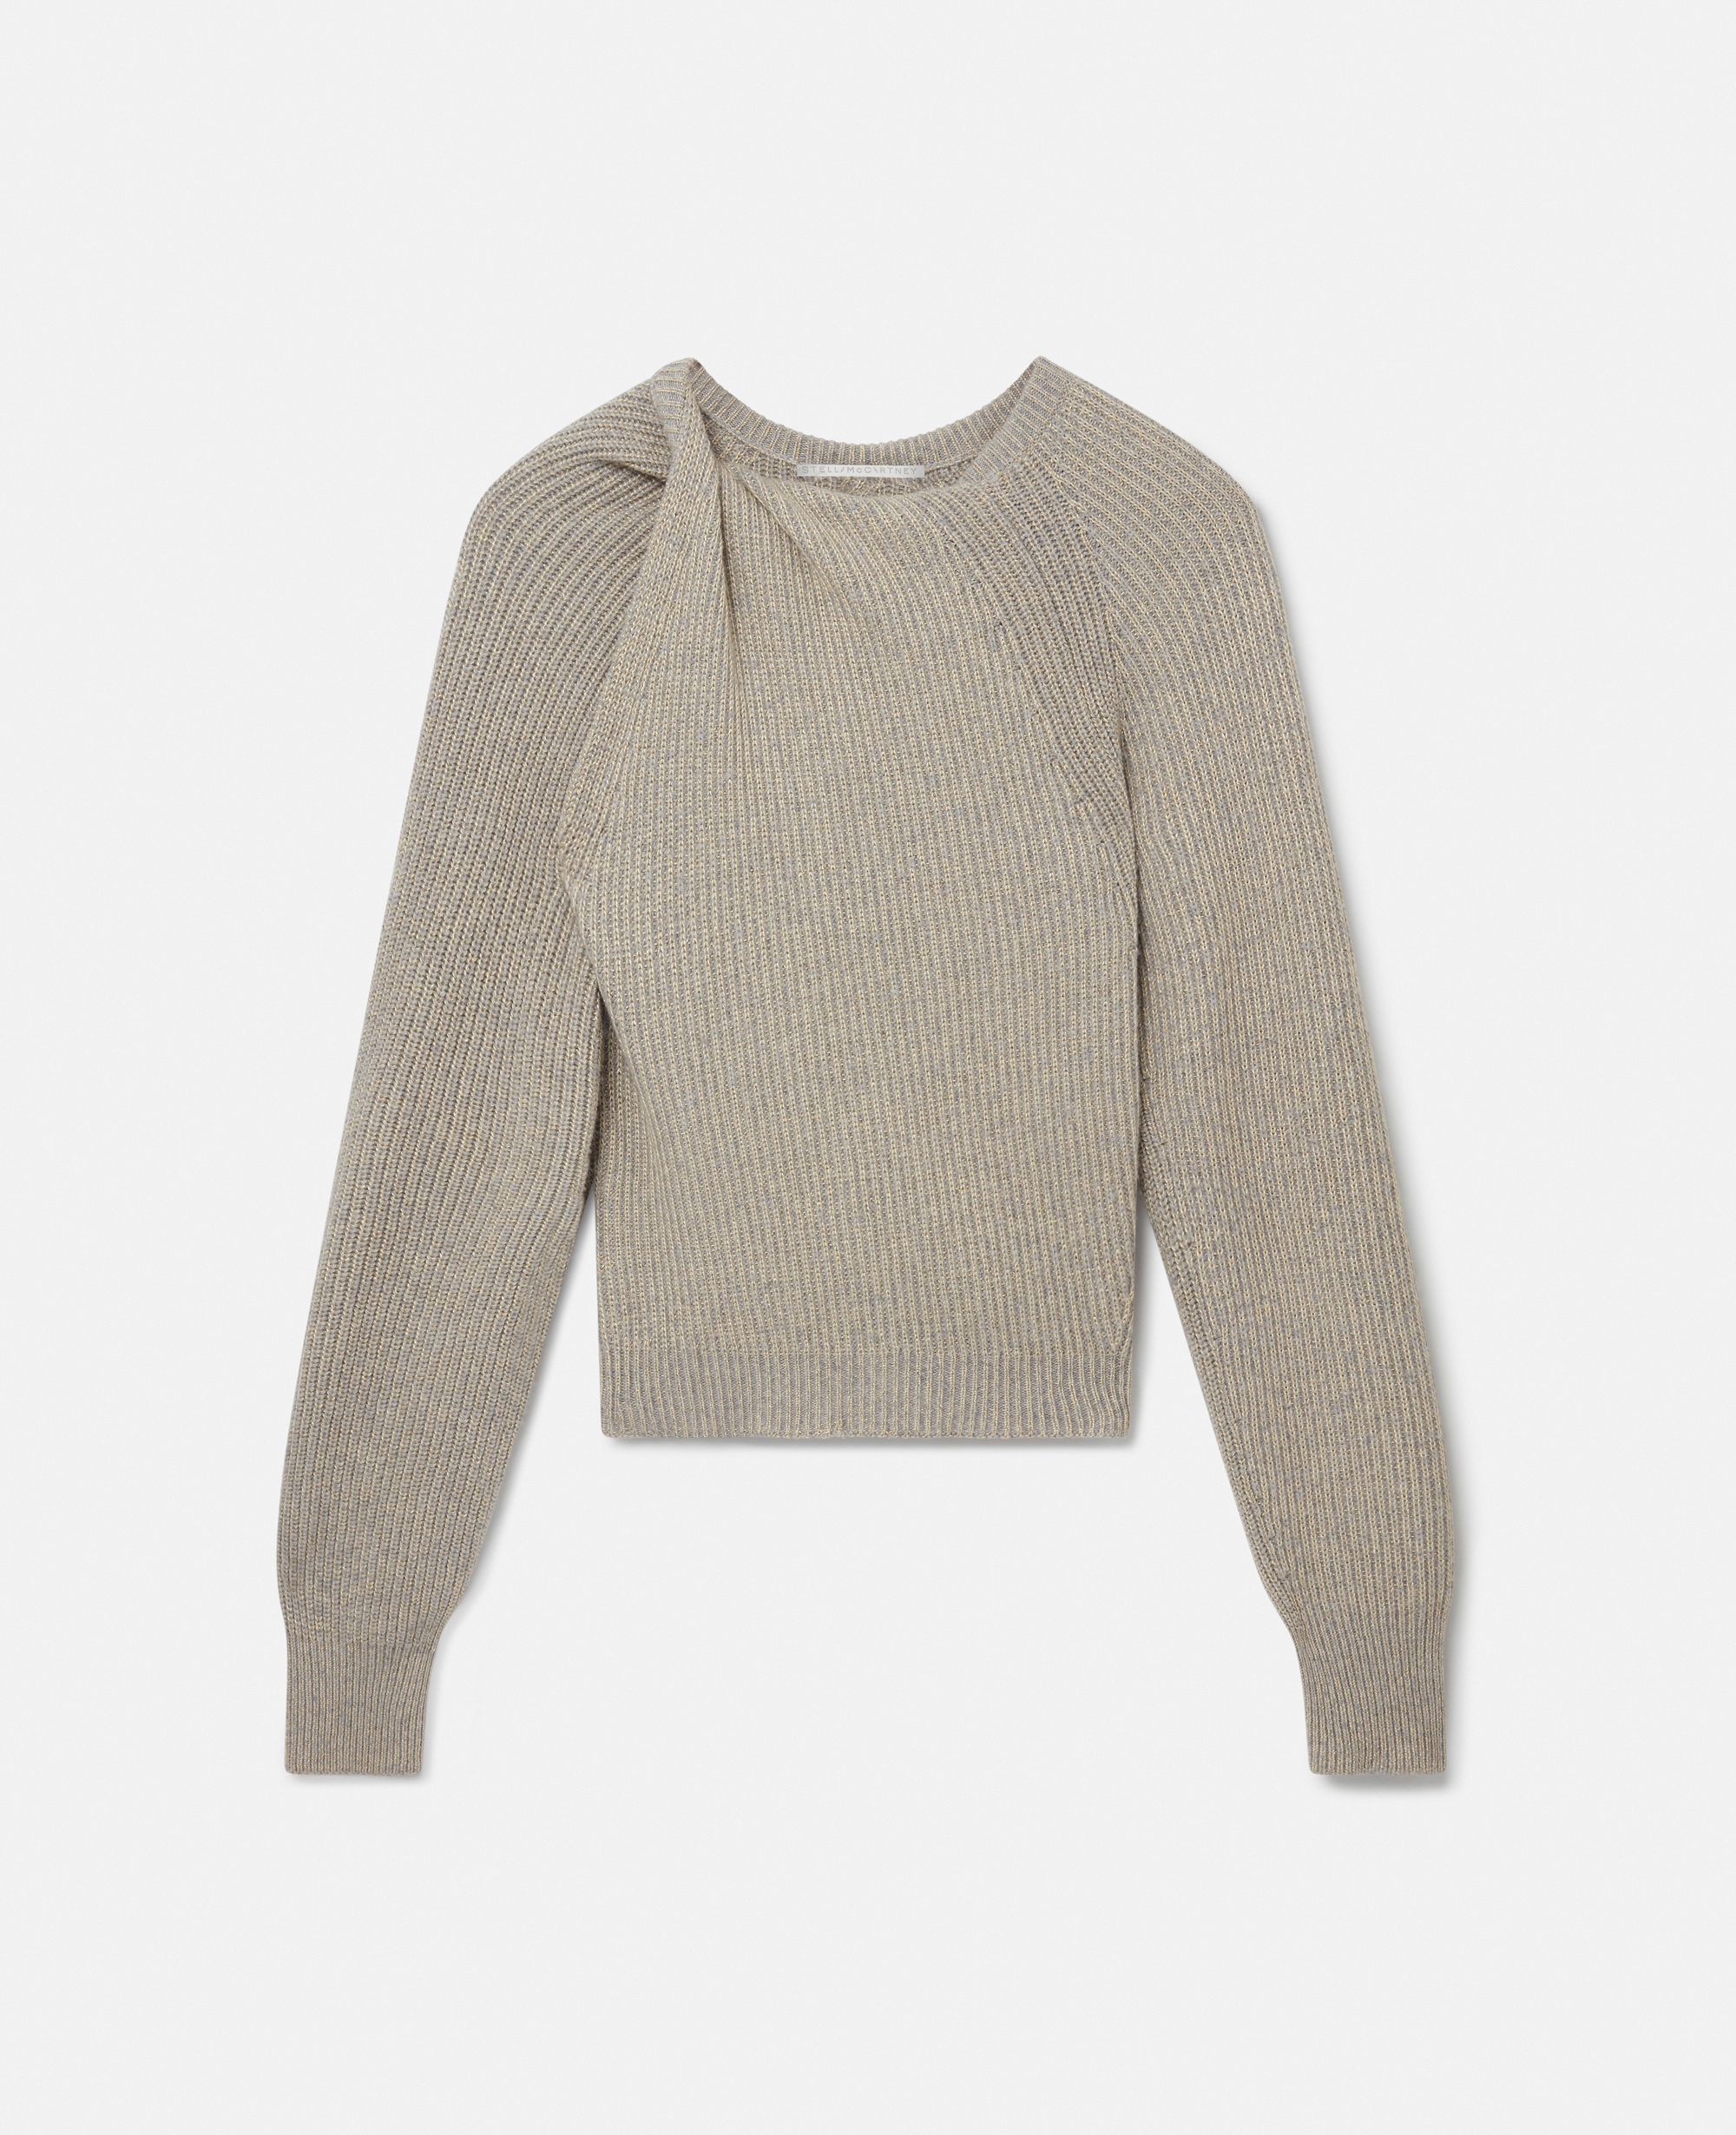 Stella Mccartney Regenerated Cashmere Shifting Knot Jumper In Pewter Grey